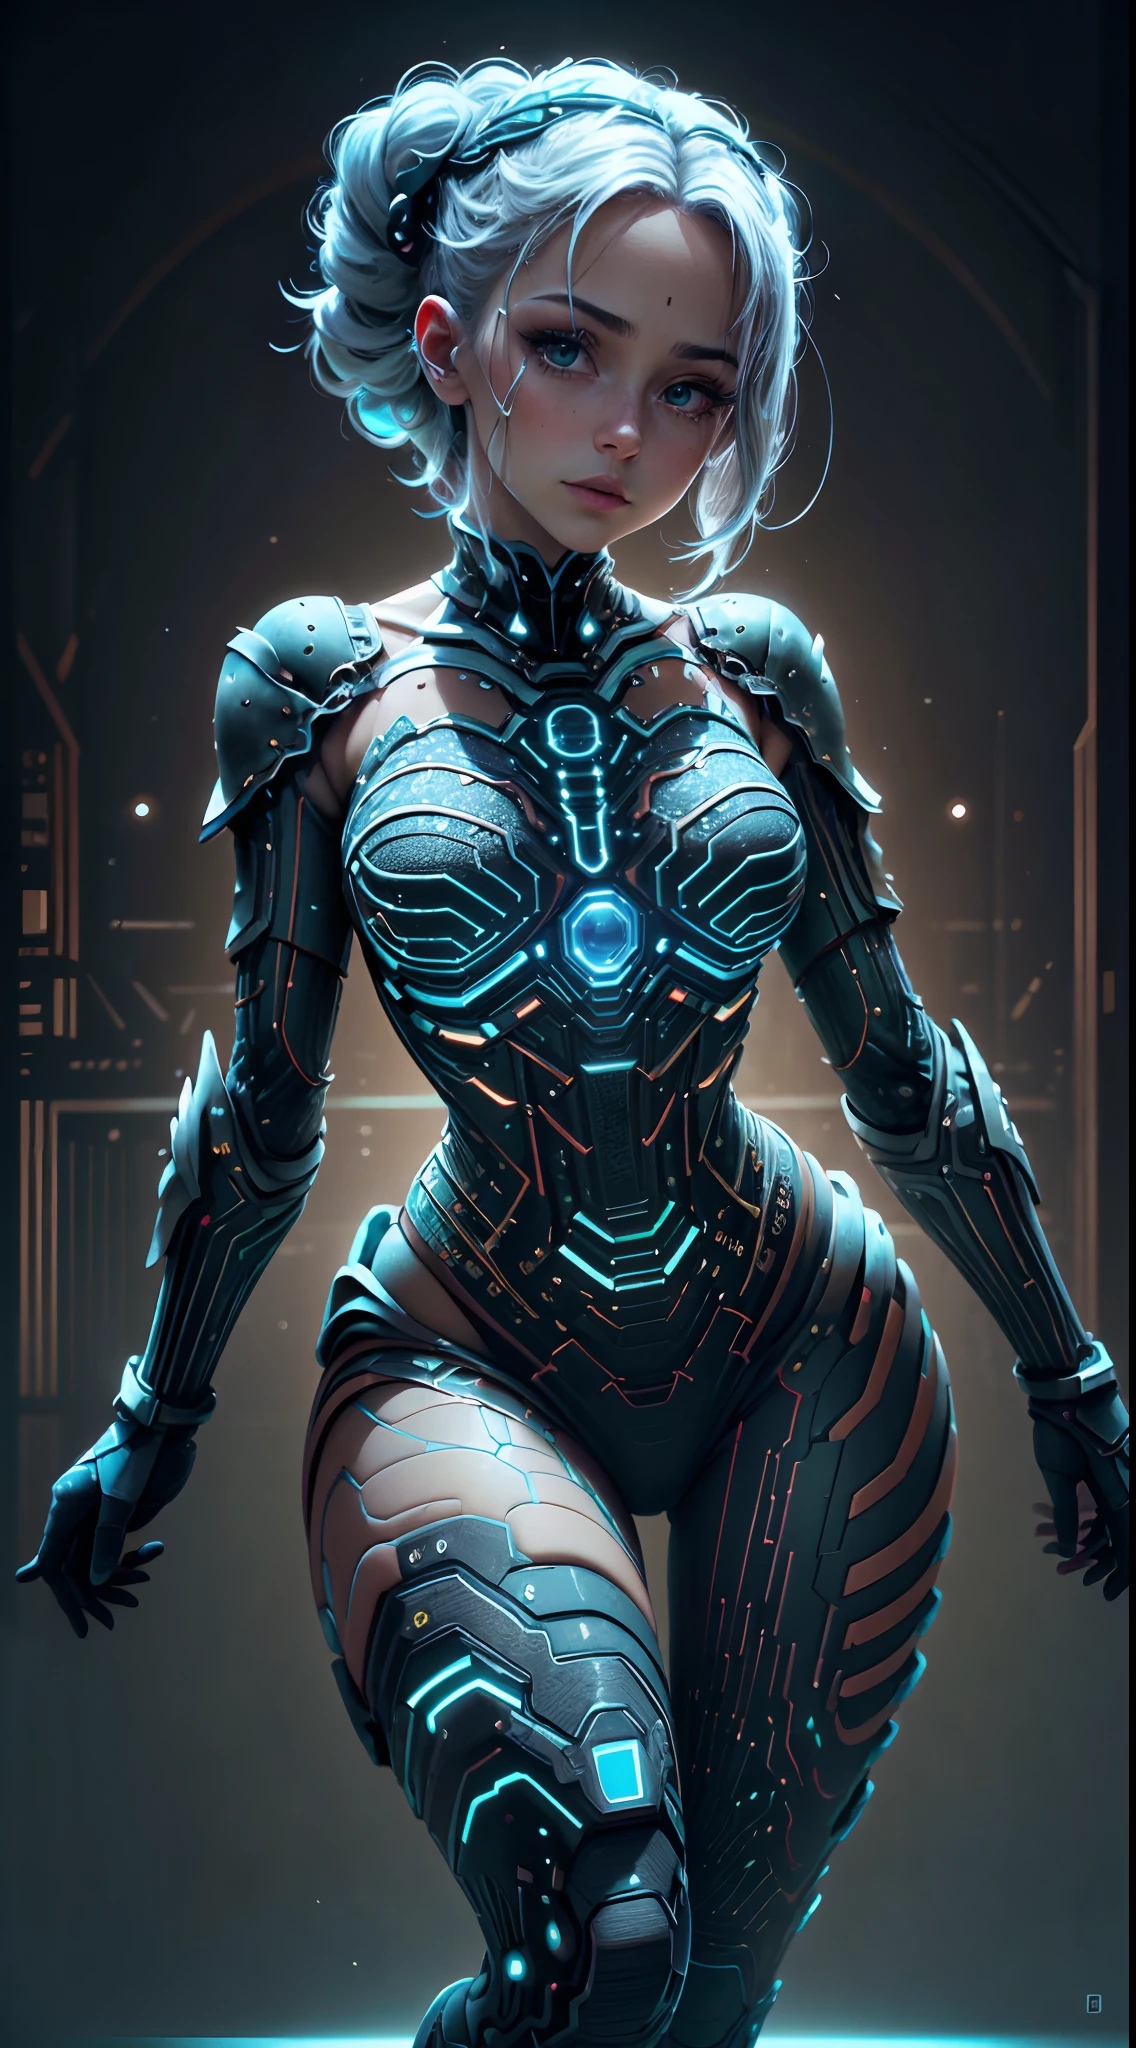 ((Best Quality)), ((Masterpiece)), (detailed: 1.4), ..3D, an image of a beautiful cyberpunk woman with thick voluminous hair,blue light particules, Pure energy, chaos, antitech,(White suit:1.4),HDR (High Dymanic Range), ray tracing ,laboratory:1.4, NVIDIA RTX, Super-Resolution, Unreal 5, subsurface dispersion, Textured PBR, post-processing, Anisotropic filtering, depth of field, Maximum clarity and sharpness, Multilayer textures, Albedo and specular maps, surface shading, Accurate simulation of light-material interaction,perfect proportions,Octane representation,two tone lighting,wide opening,Low ISO,white balance,rule of thirds,RAW 8K, unreal engine:1.4,UHD, detailed hands, La Best Quality:1.4, photorealistic:1.4, skin texture:1.4, Masterpiece:1.8,